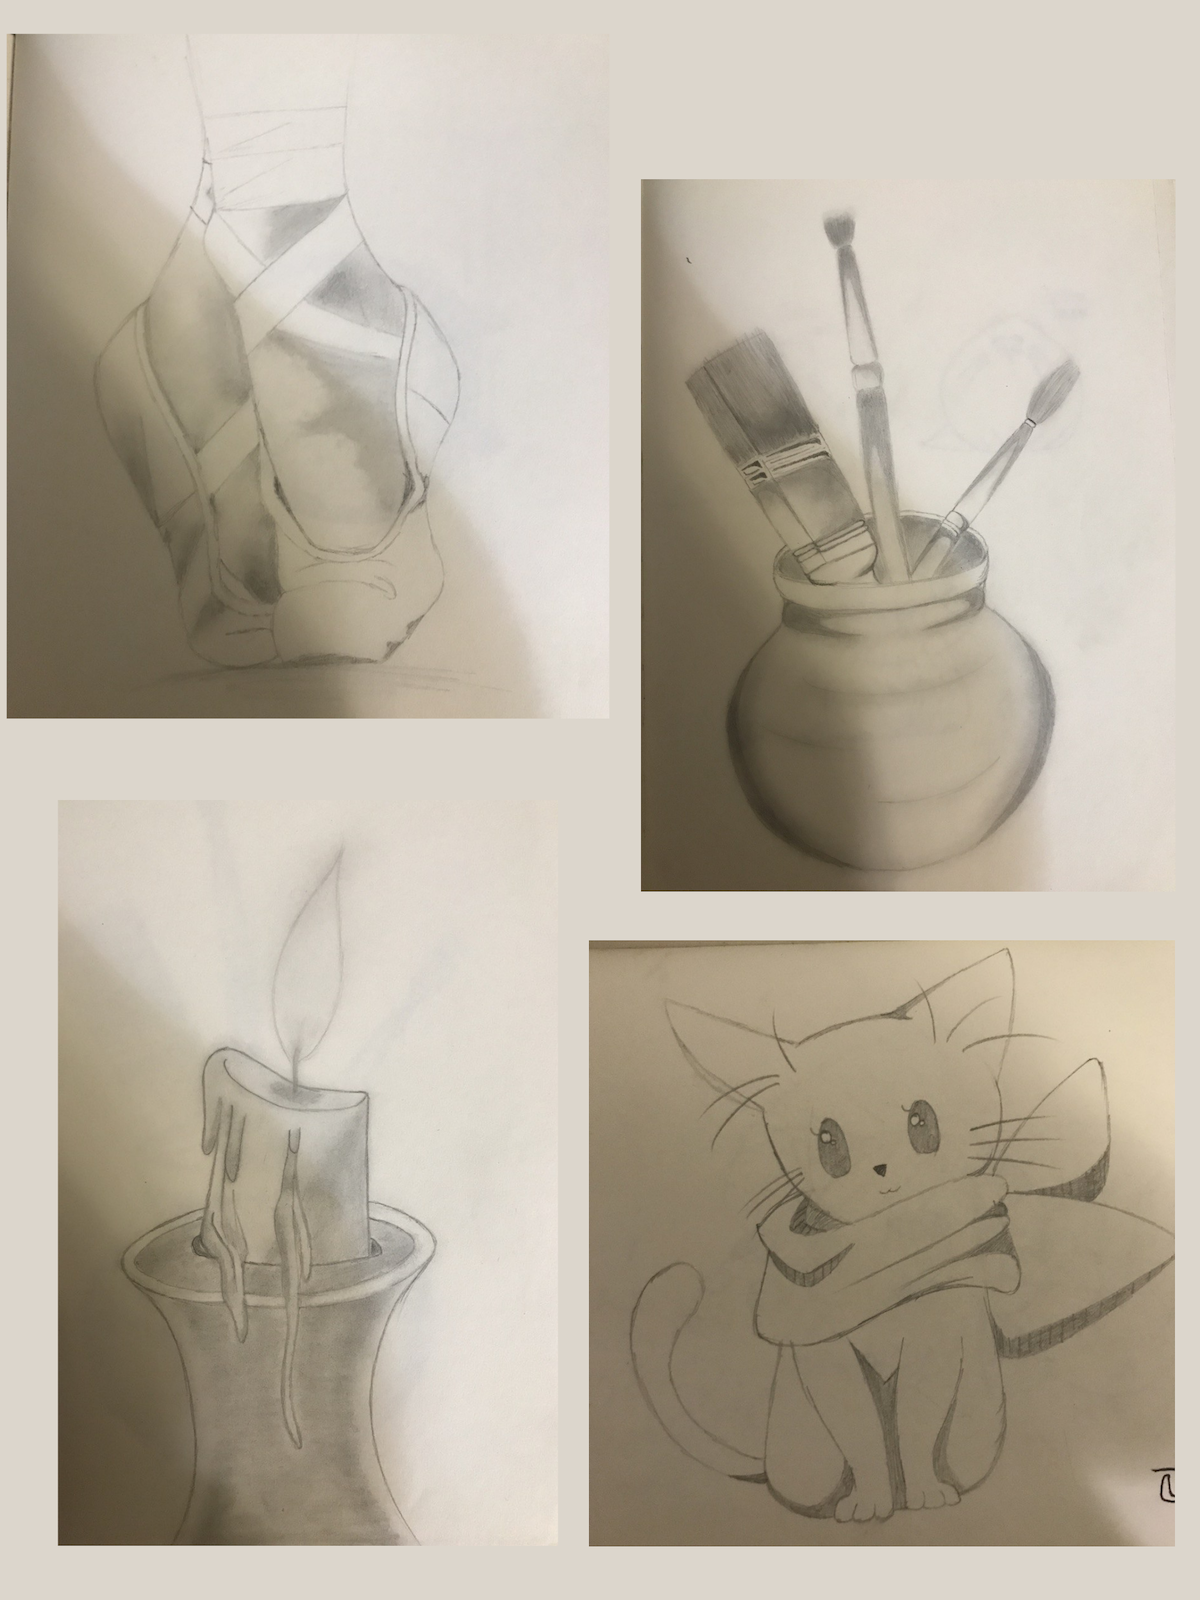 Here are some of the drawings that Veronica made in term 2.